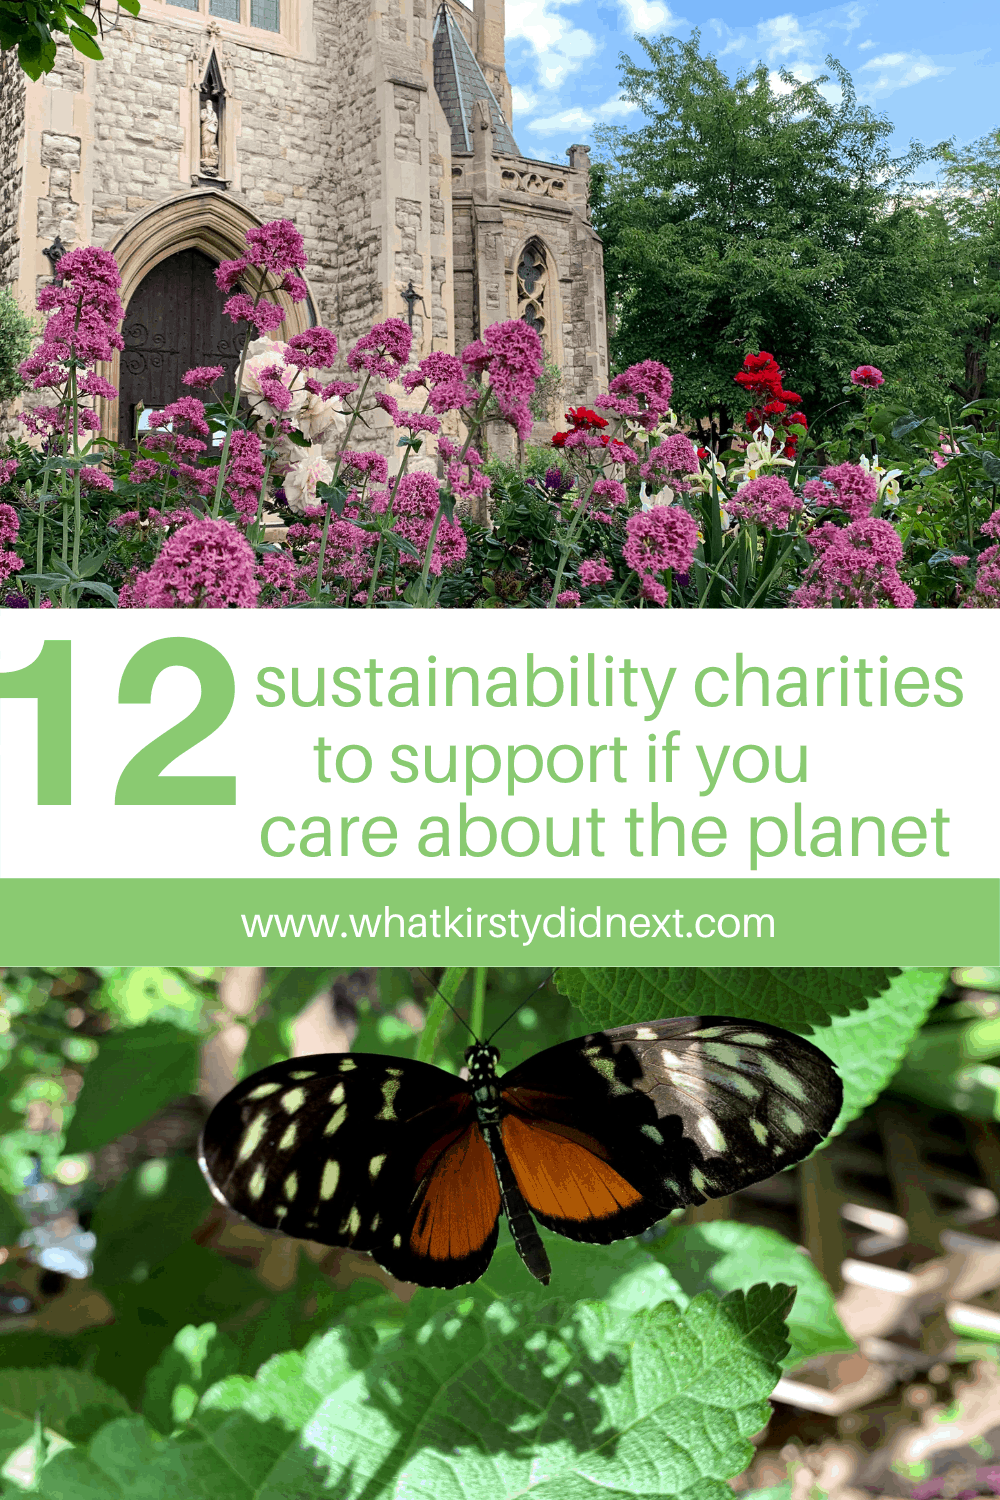 12 sustainability charities to support if you care about the planet